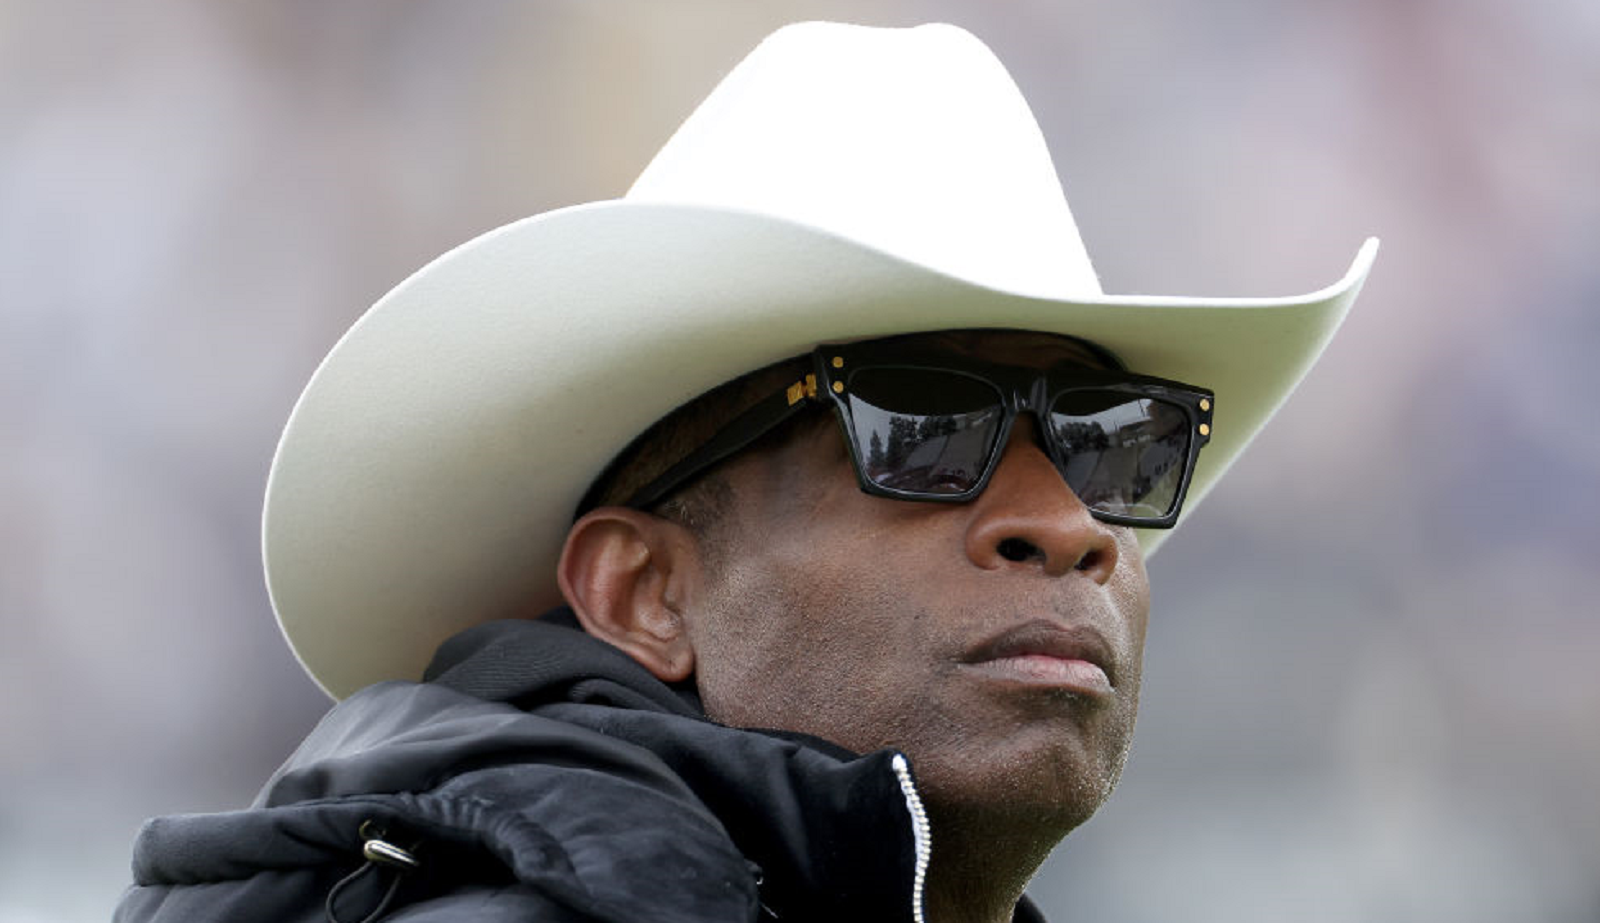 Deion Sanders Named ‘Sportsperson Of The Year’ After Finishing 4-8 At Colorado, College Football Fans React